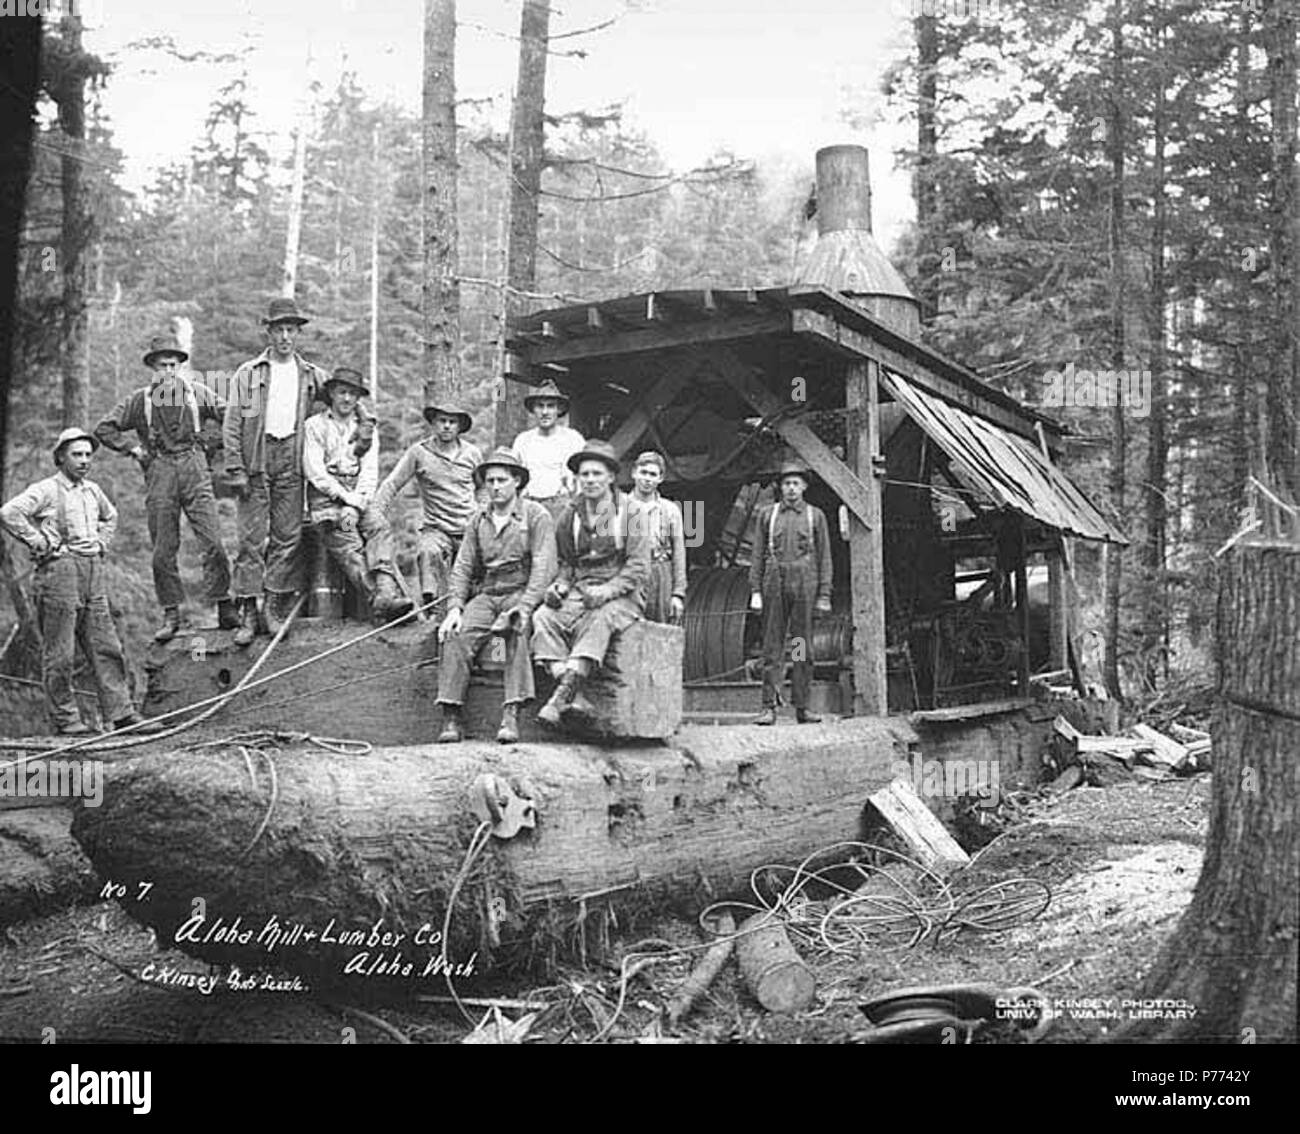 . English: Logging crew and donkey engine, Aloha Lumber Company, ca. 1921 . English: Caption on image: Aloha Mill & Lumber Co., Aloha, Wash. C. Kinsey Photo, Seattle. No. 7 PH Coll 516.21 Aloha was once home to Aloha Mill and Shake Company. It is located two miles east of the Pacific Ocean on Beaver Creek in west central Grays Harbor County. It was founded by R. D. Emerson and W. H. Dole in 1905. The name, a Hawaiian greeting, was chosen by members of the Dole family, who were landowners and business people in Hawaii. In 1920, Aloha Mill & Lumber Co. successfully bid on a unit of timber near M Stock Photo